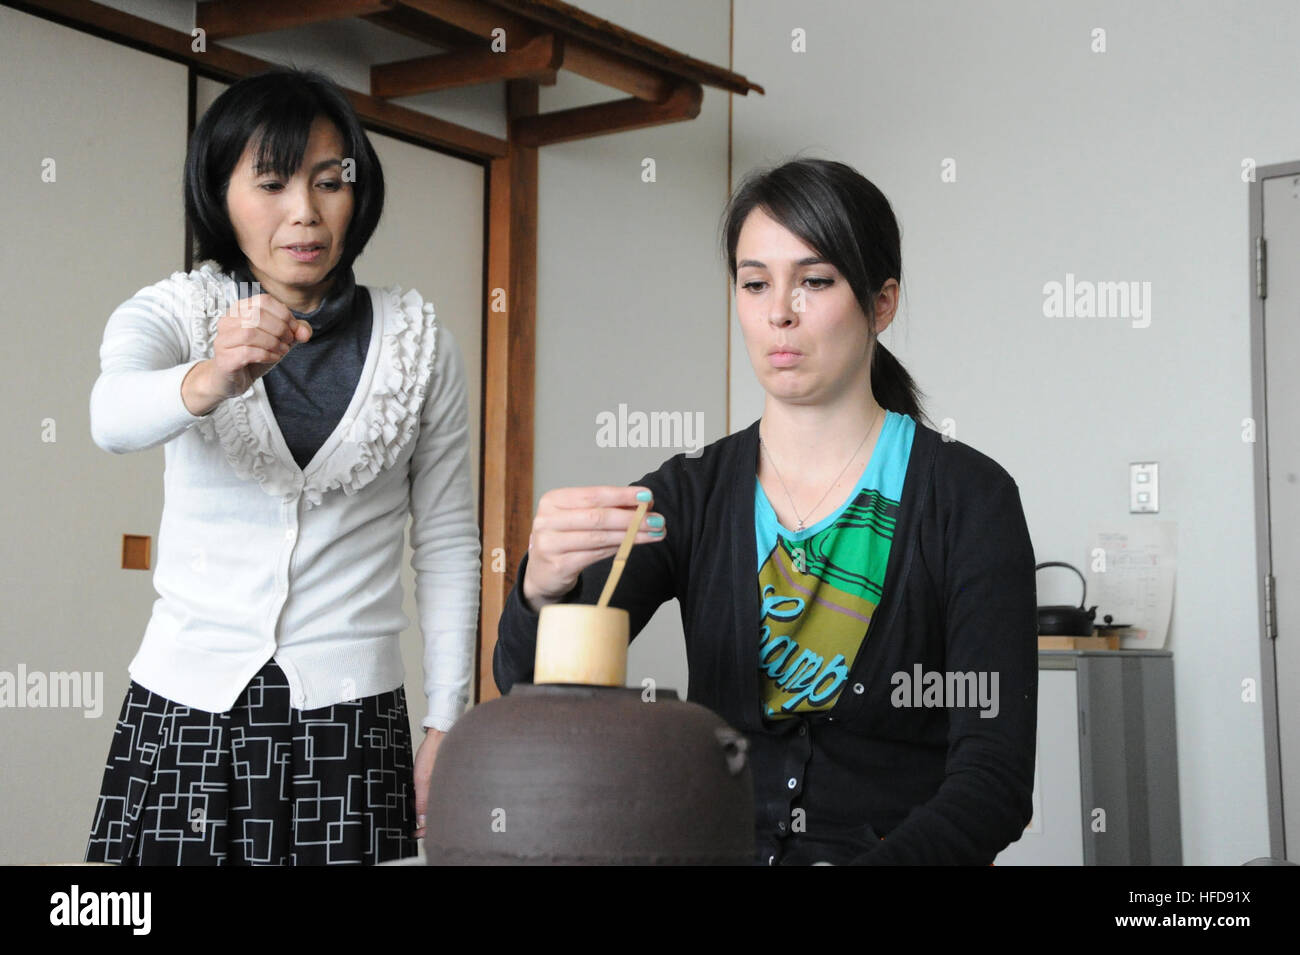 120420-N-TO330-246 AYASE, Japan (Apr. 20, 2012) – Sumie Maruyama (left) instructs her student, Mary Anna Fox, on how to properly hold the water ladle during a tea ceremony class held at the Japan Maritime Self Defense Force bachelor housing on Naval Air Facility (NAF) Atsugi. Maruyama works in the installation's Host Nation Relations office where she acts as a liaison between the command and surrounding communities fostering good relations between NAF Atsugi and local citizens through community relation opportunities. (U.S. Navy photo by Mass Communication Specialist 3rd Class Vivian Blakely/R Stock Photo